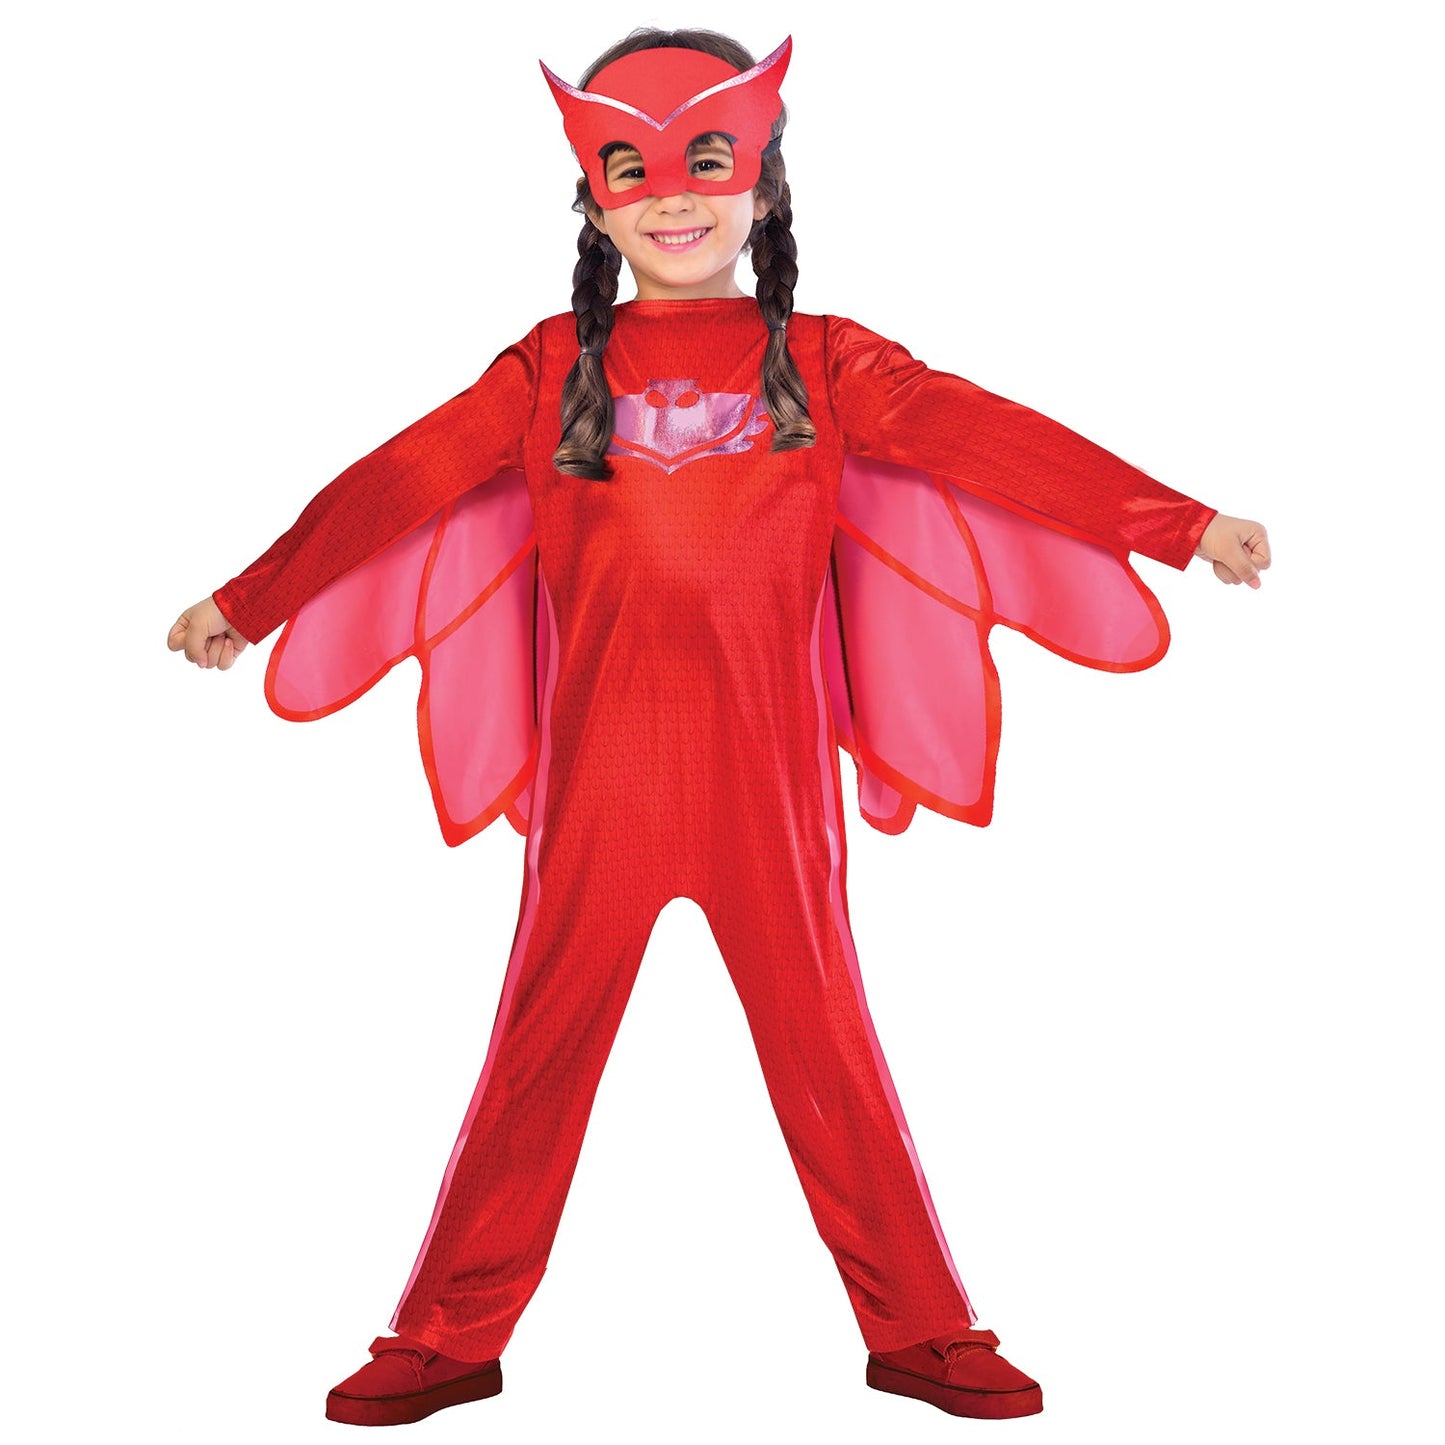 PJ Masks Owlette Costume includes jumpsuit, wings and mask